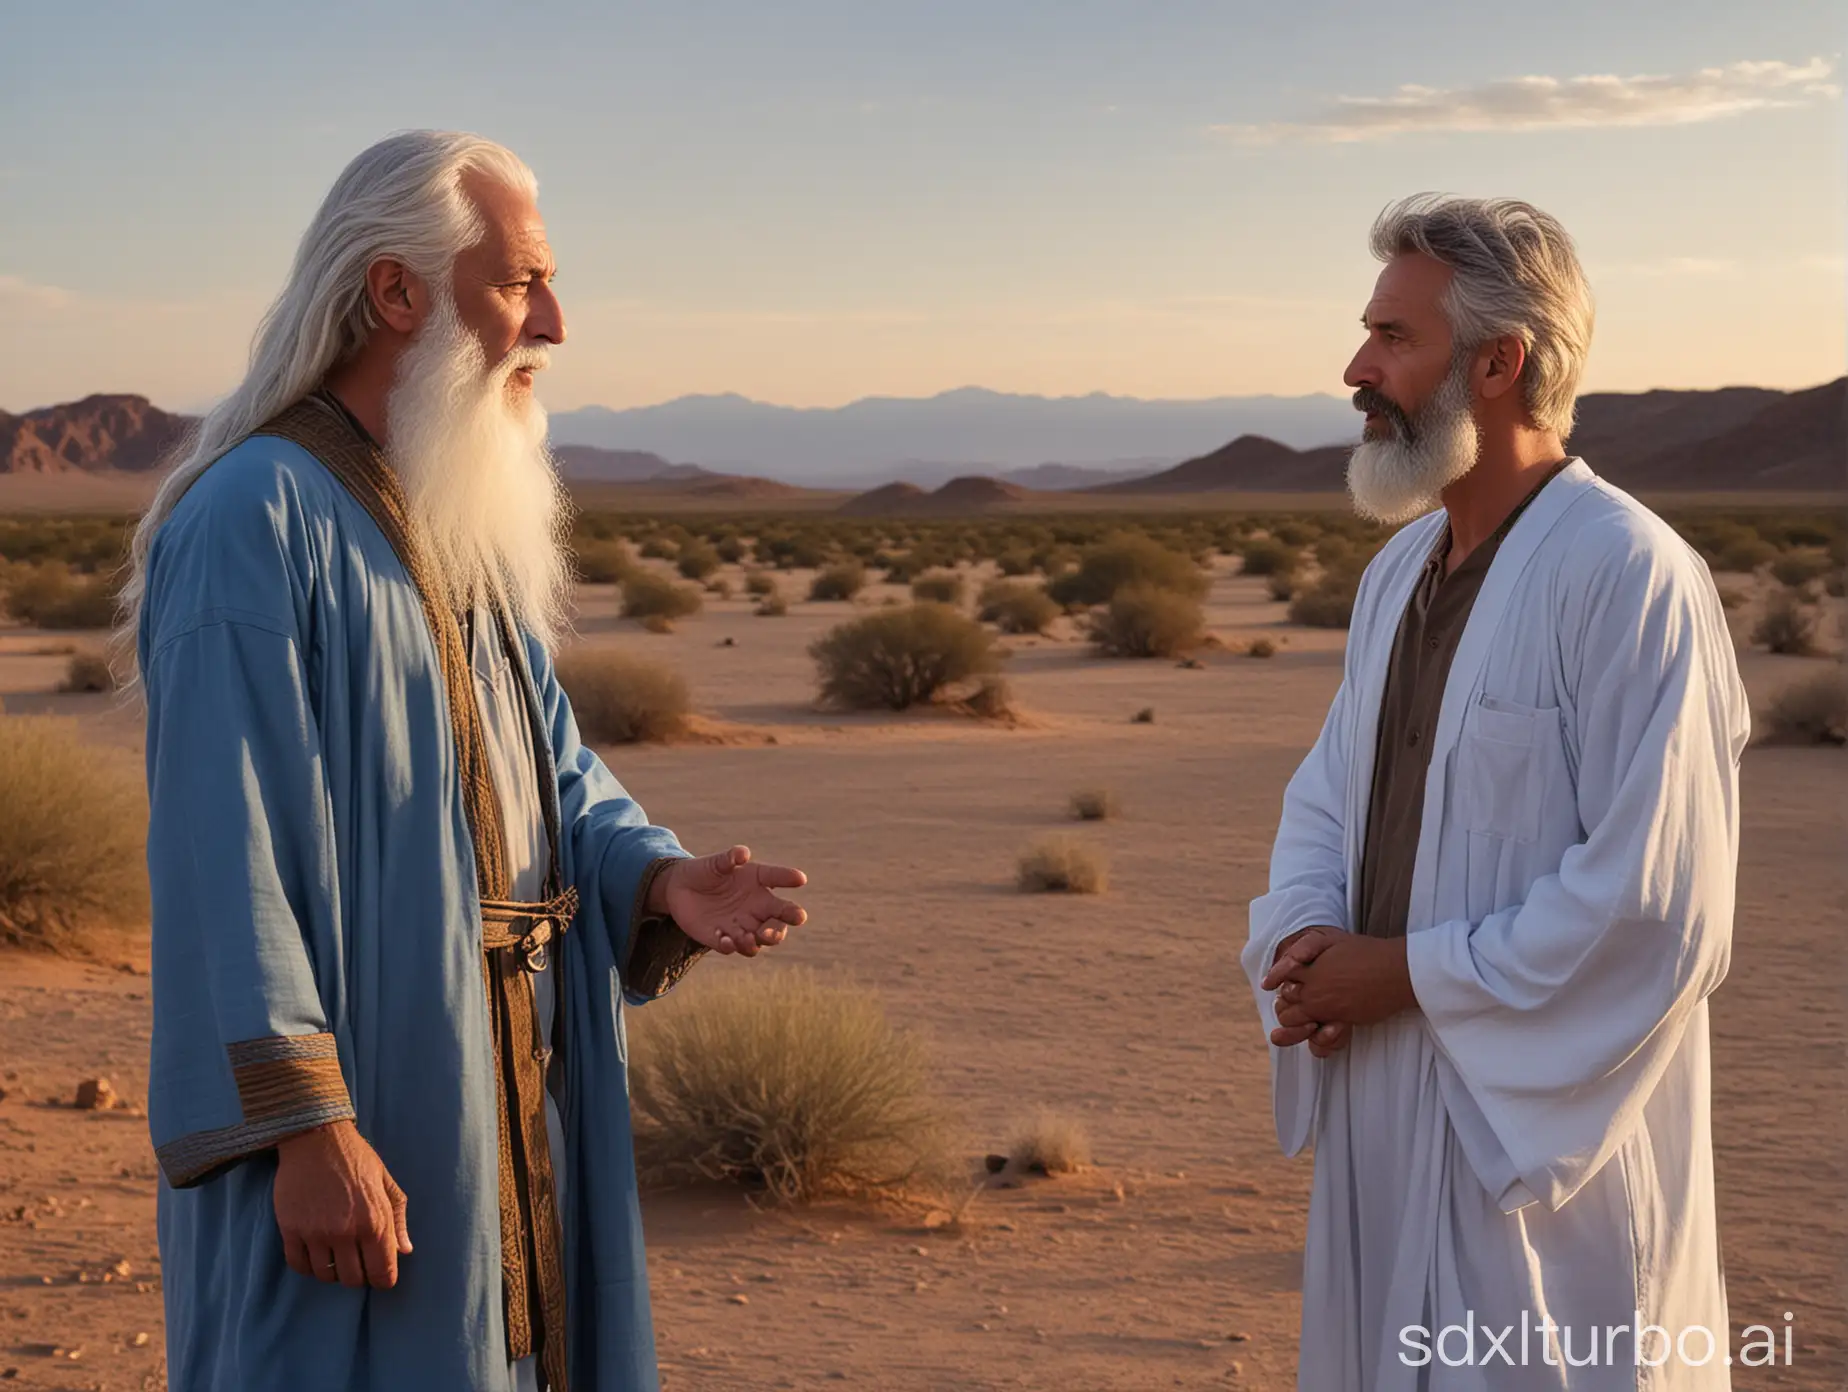 In this image, we see two men engaged in conversation against the backdrop of a desert sunset. The man on the left is an older man with white hair and a gray beard, dressed in a blue robe that suggests he is a religious figure. His counterpart on the right is a younger man with long brown hair and a beard, dressed in a brown tunic that may indicate a rougher lifestyle. The contrast between his attire and the serene desert scenery creates a sense of dialog between different worlds or times.